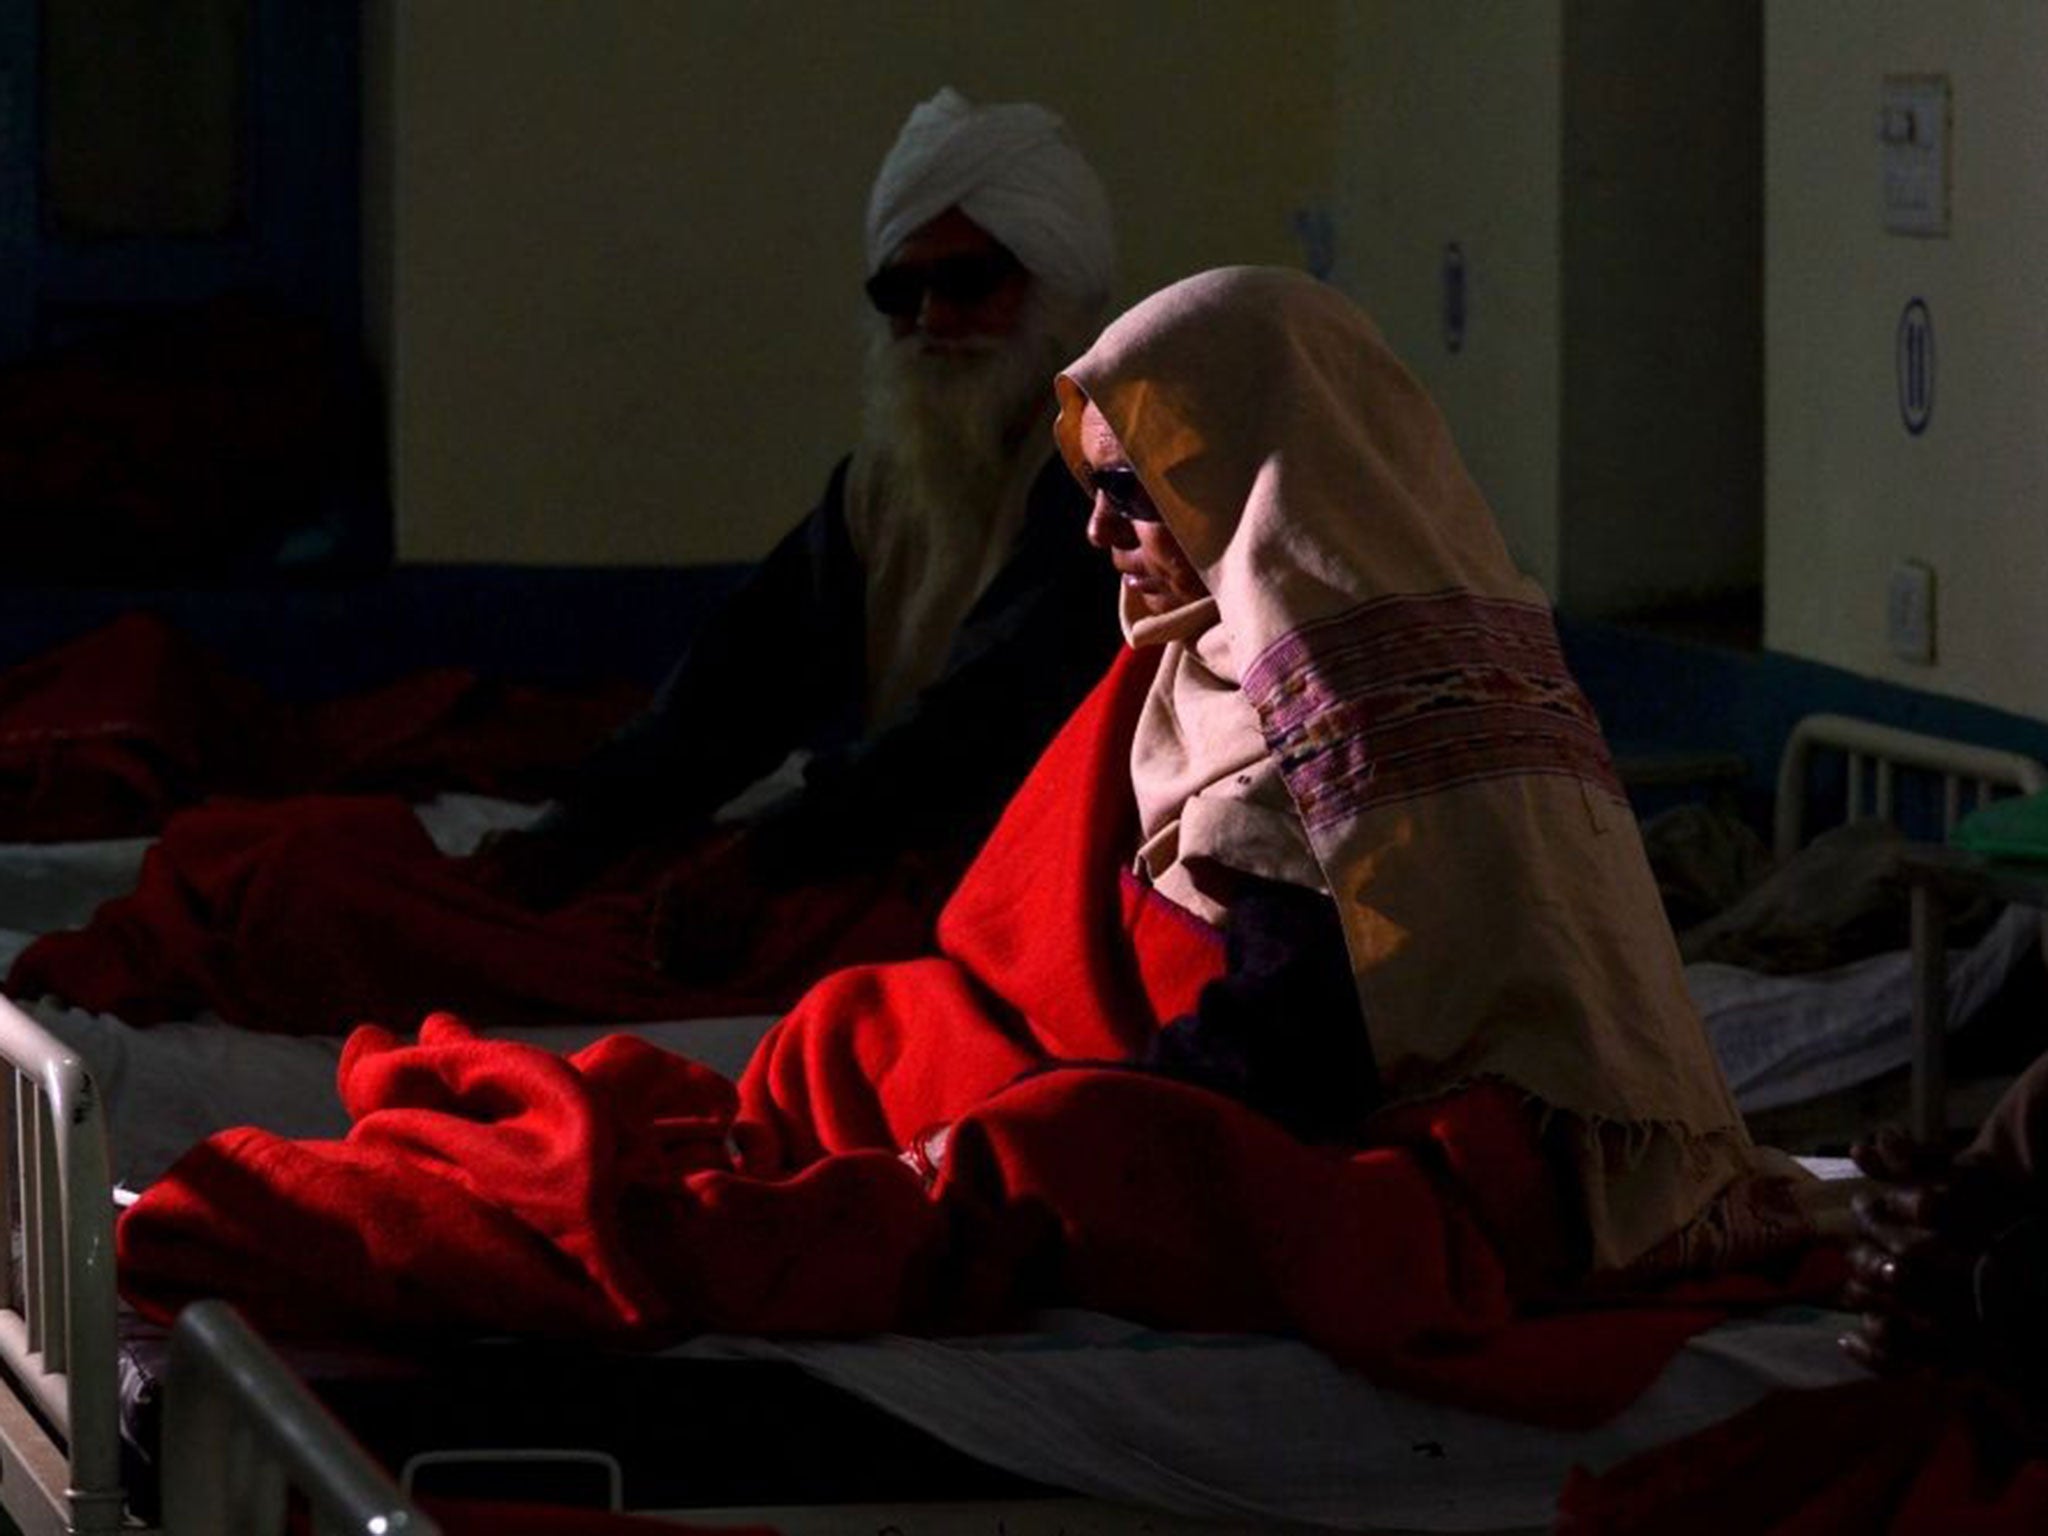 An elderly Indian patient who went blind following cataract surgery receives treatment at a hospital in Amritsar, India